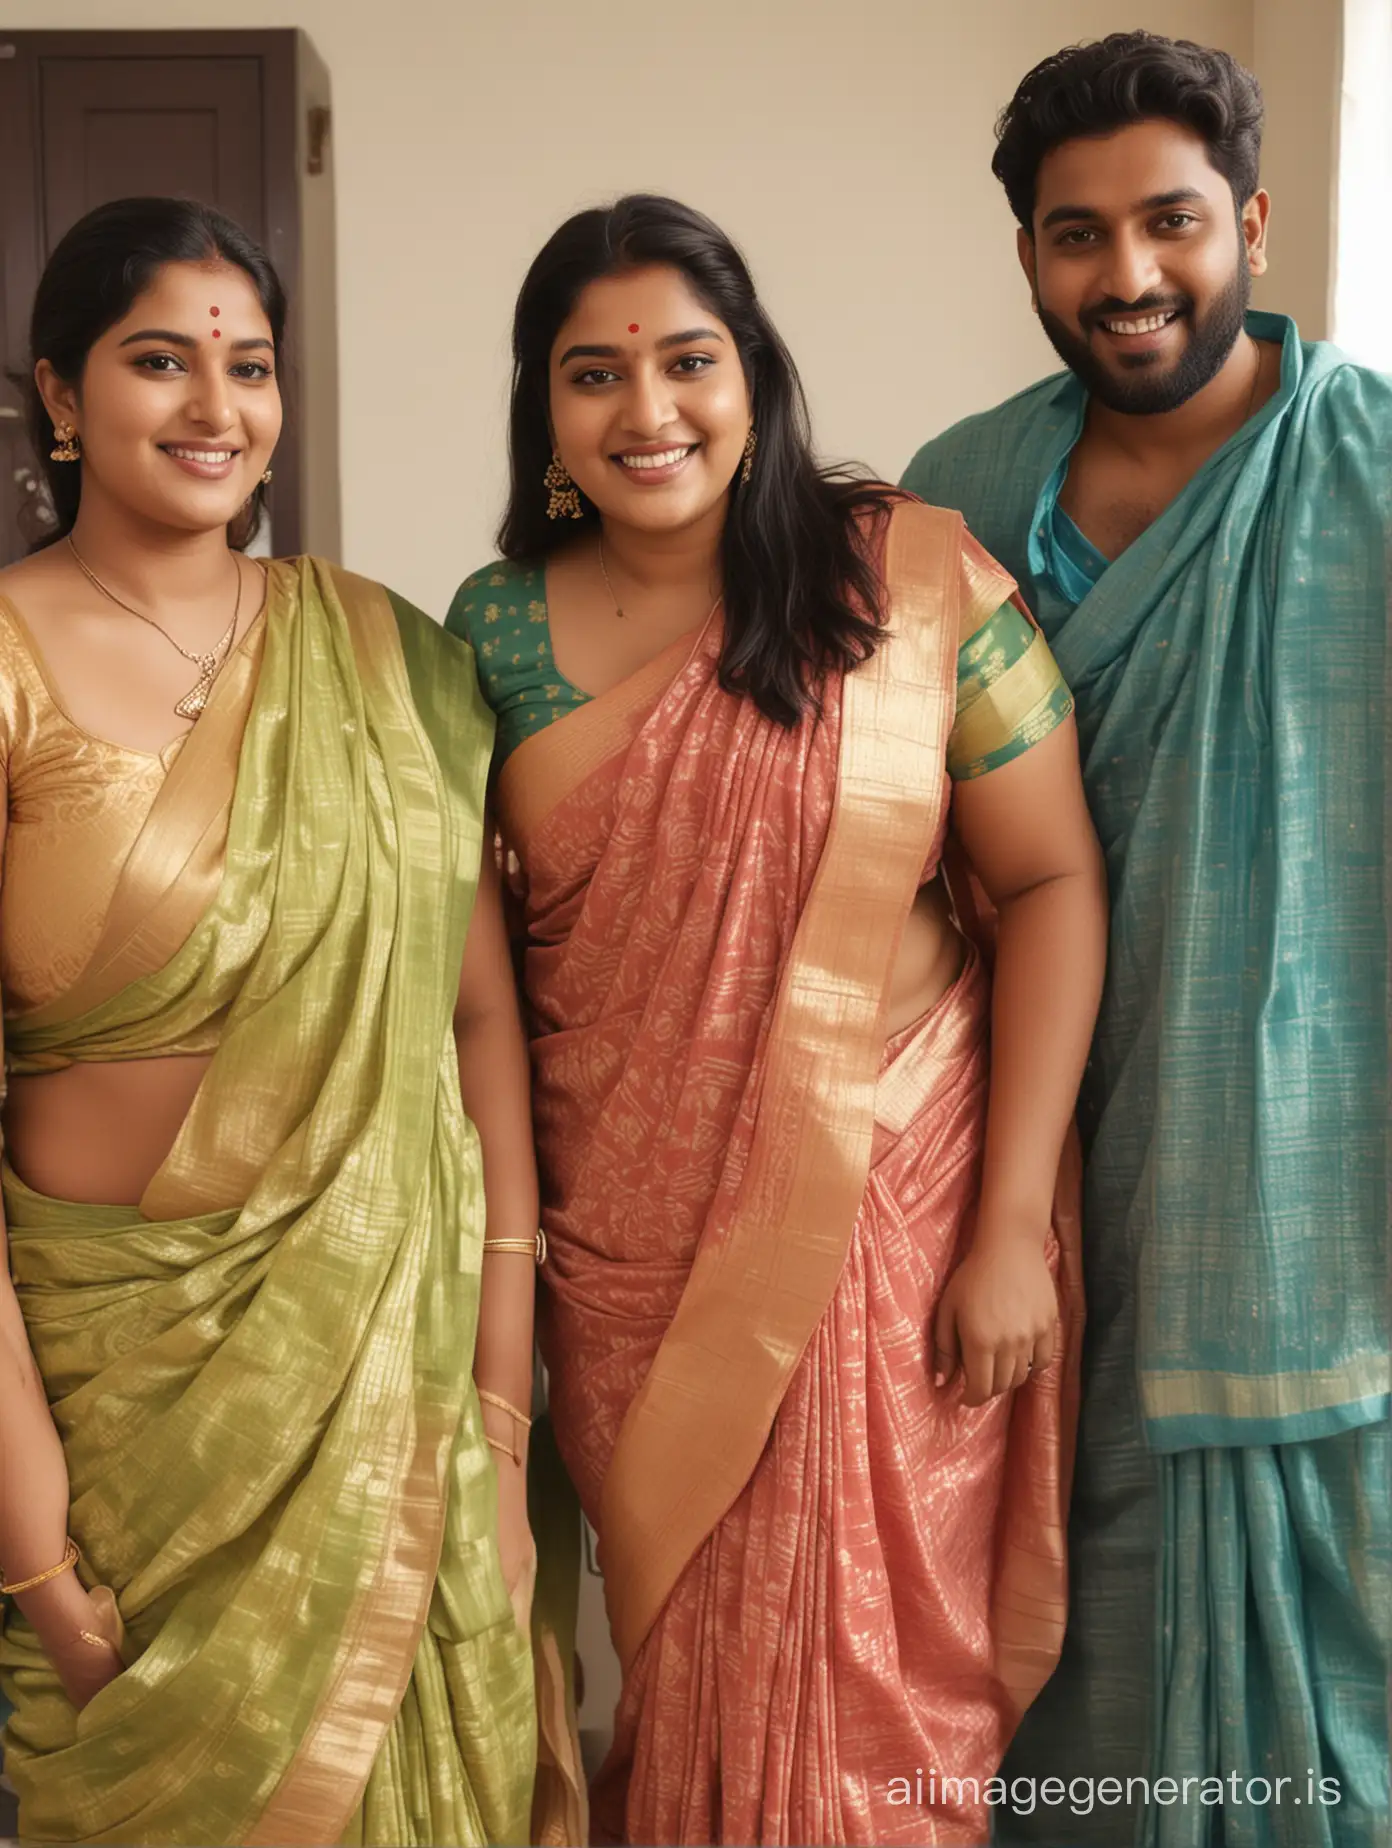 Beautiful indian plus size women wore sleeveless saree relax at home with male friends